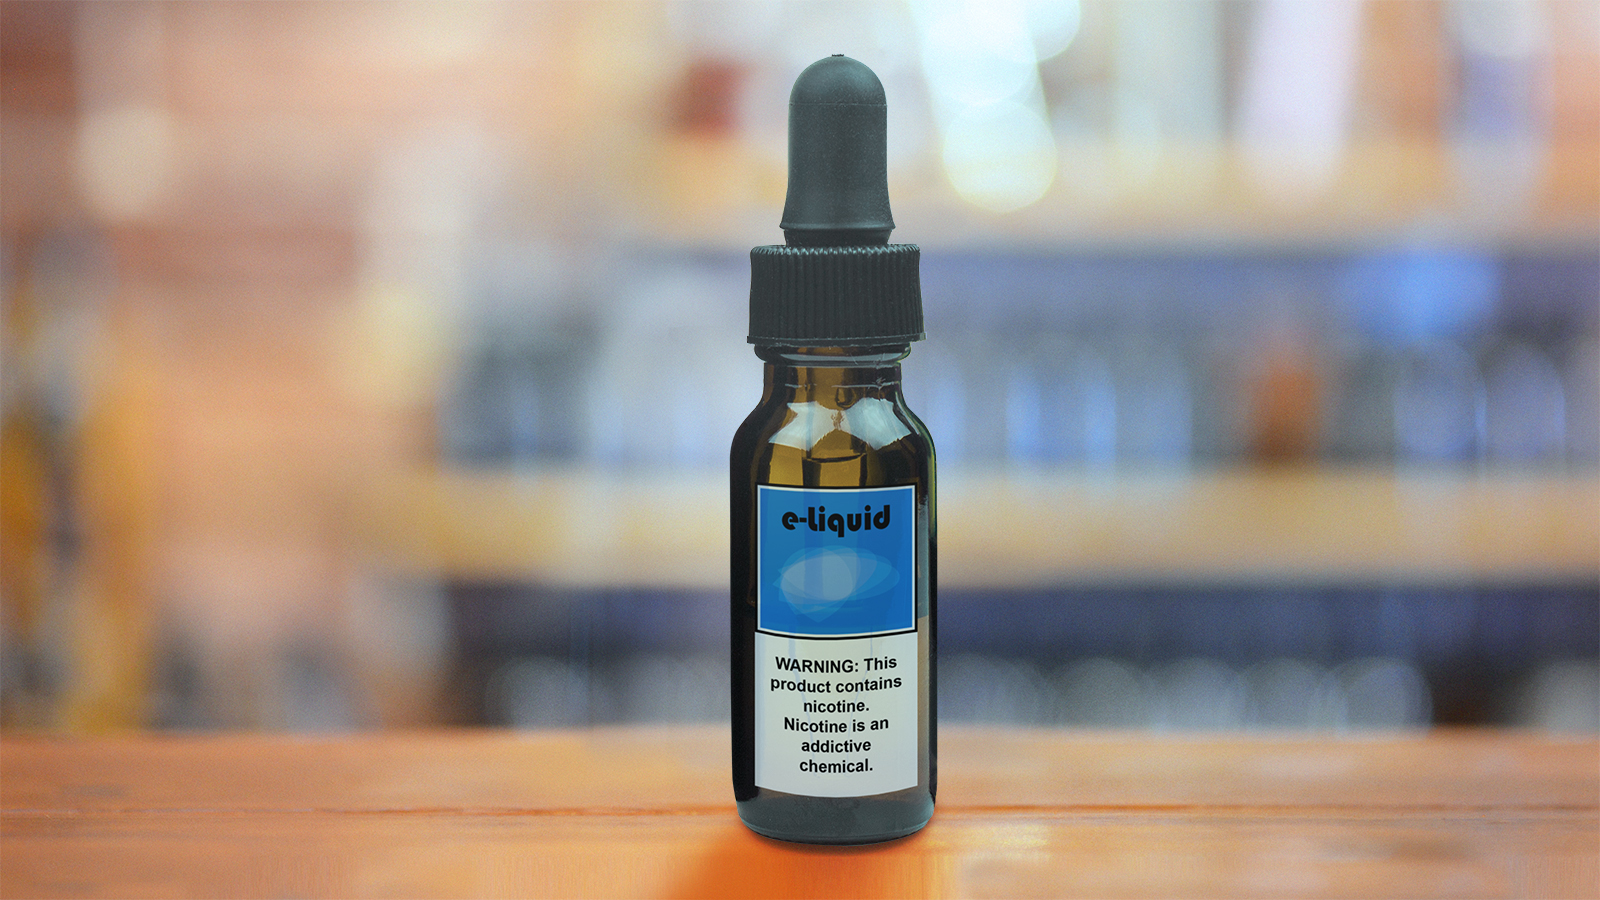 small bottle of e-liquid for use with e-cigarettes and other vaping devices